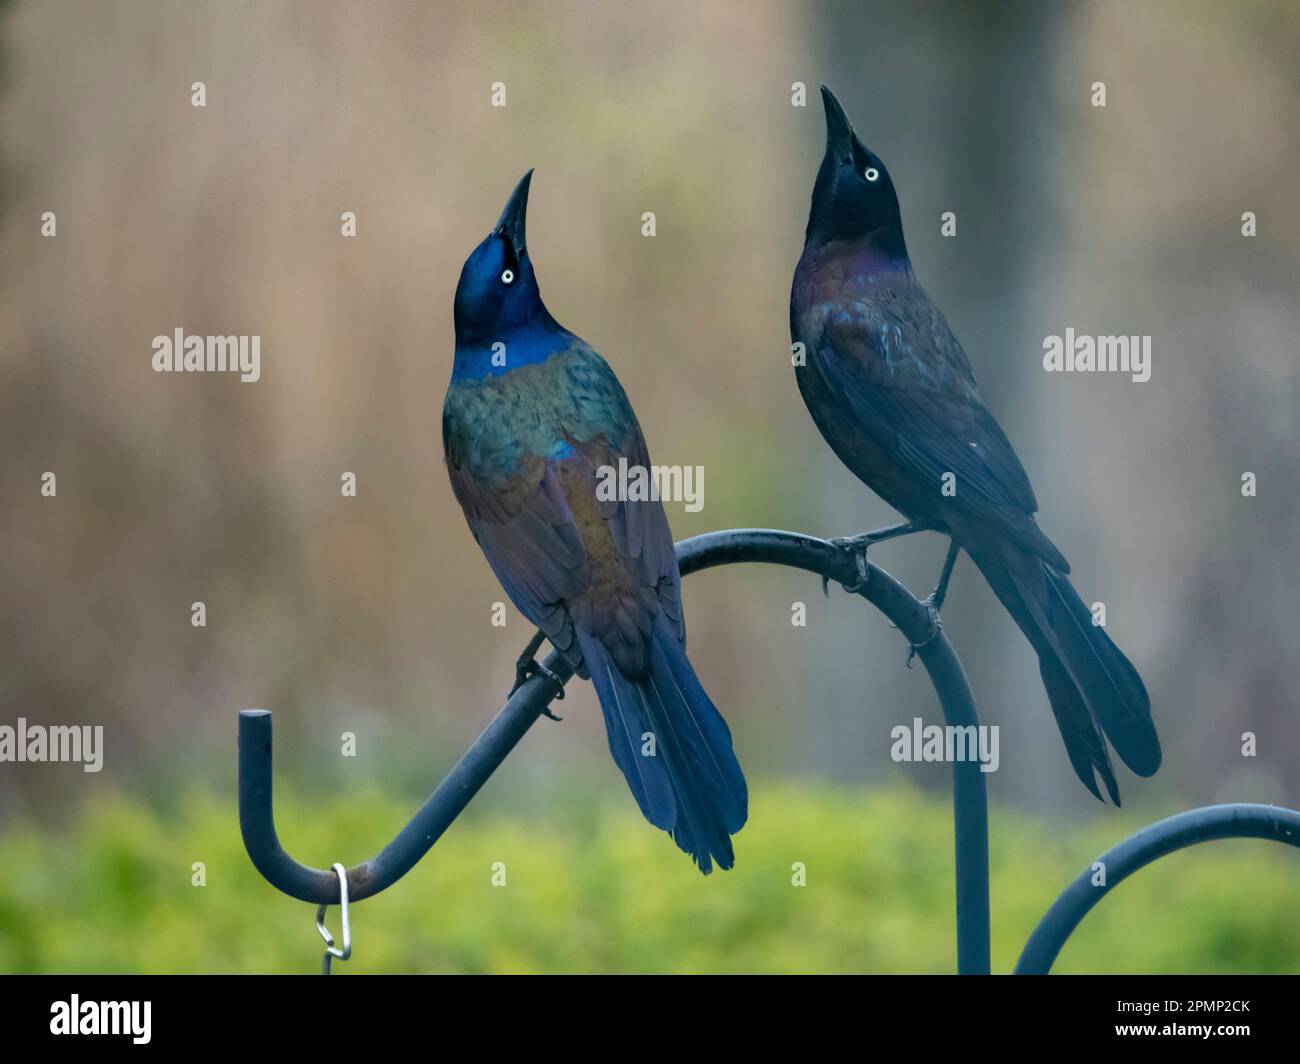 Pair of Common Grackles (Quiscalus quiscula) on bird feeder stand; Mystic, Connecticut, United States of America Stock Photo